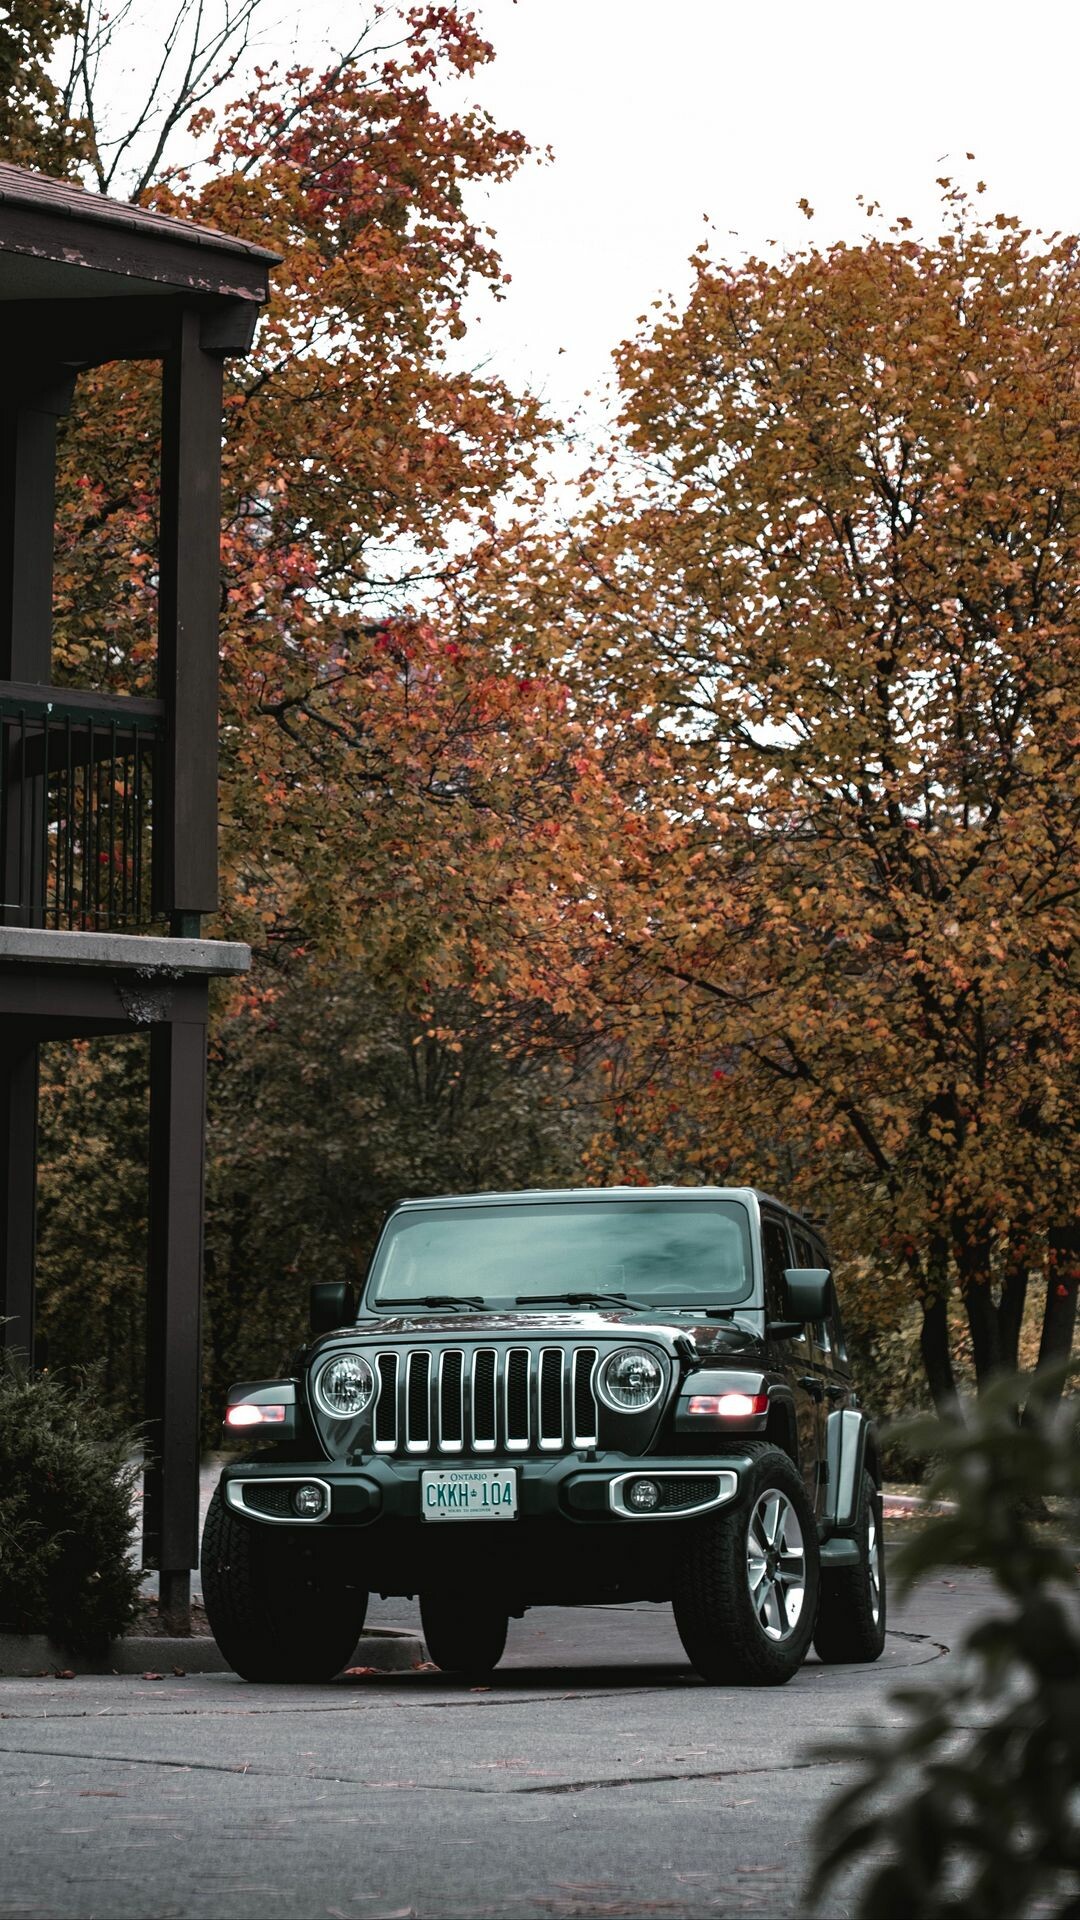 Jeep: The company has an extensive legacy of building SUVs and trucks capable of extreme off-roading adventures. 1080x1920 Full HD Wallpaper.